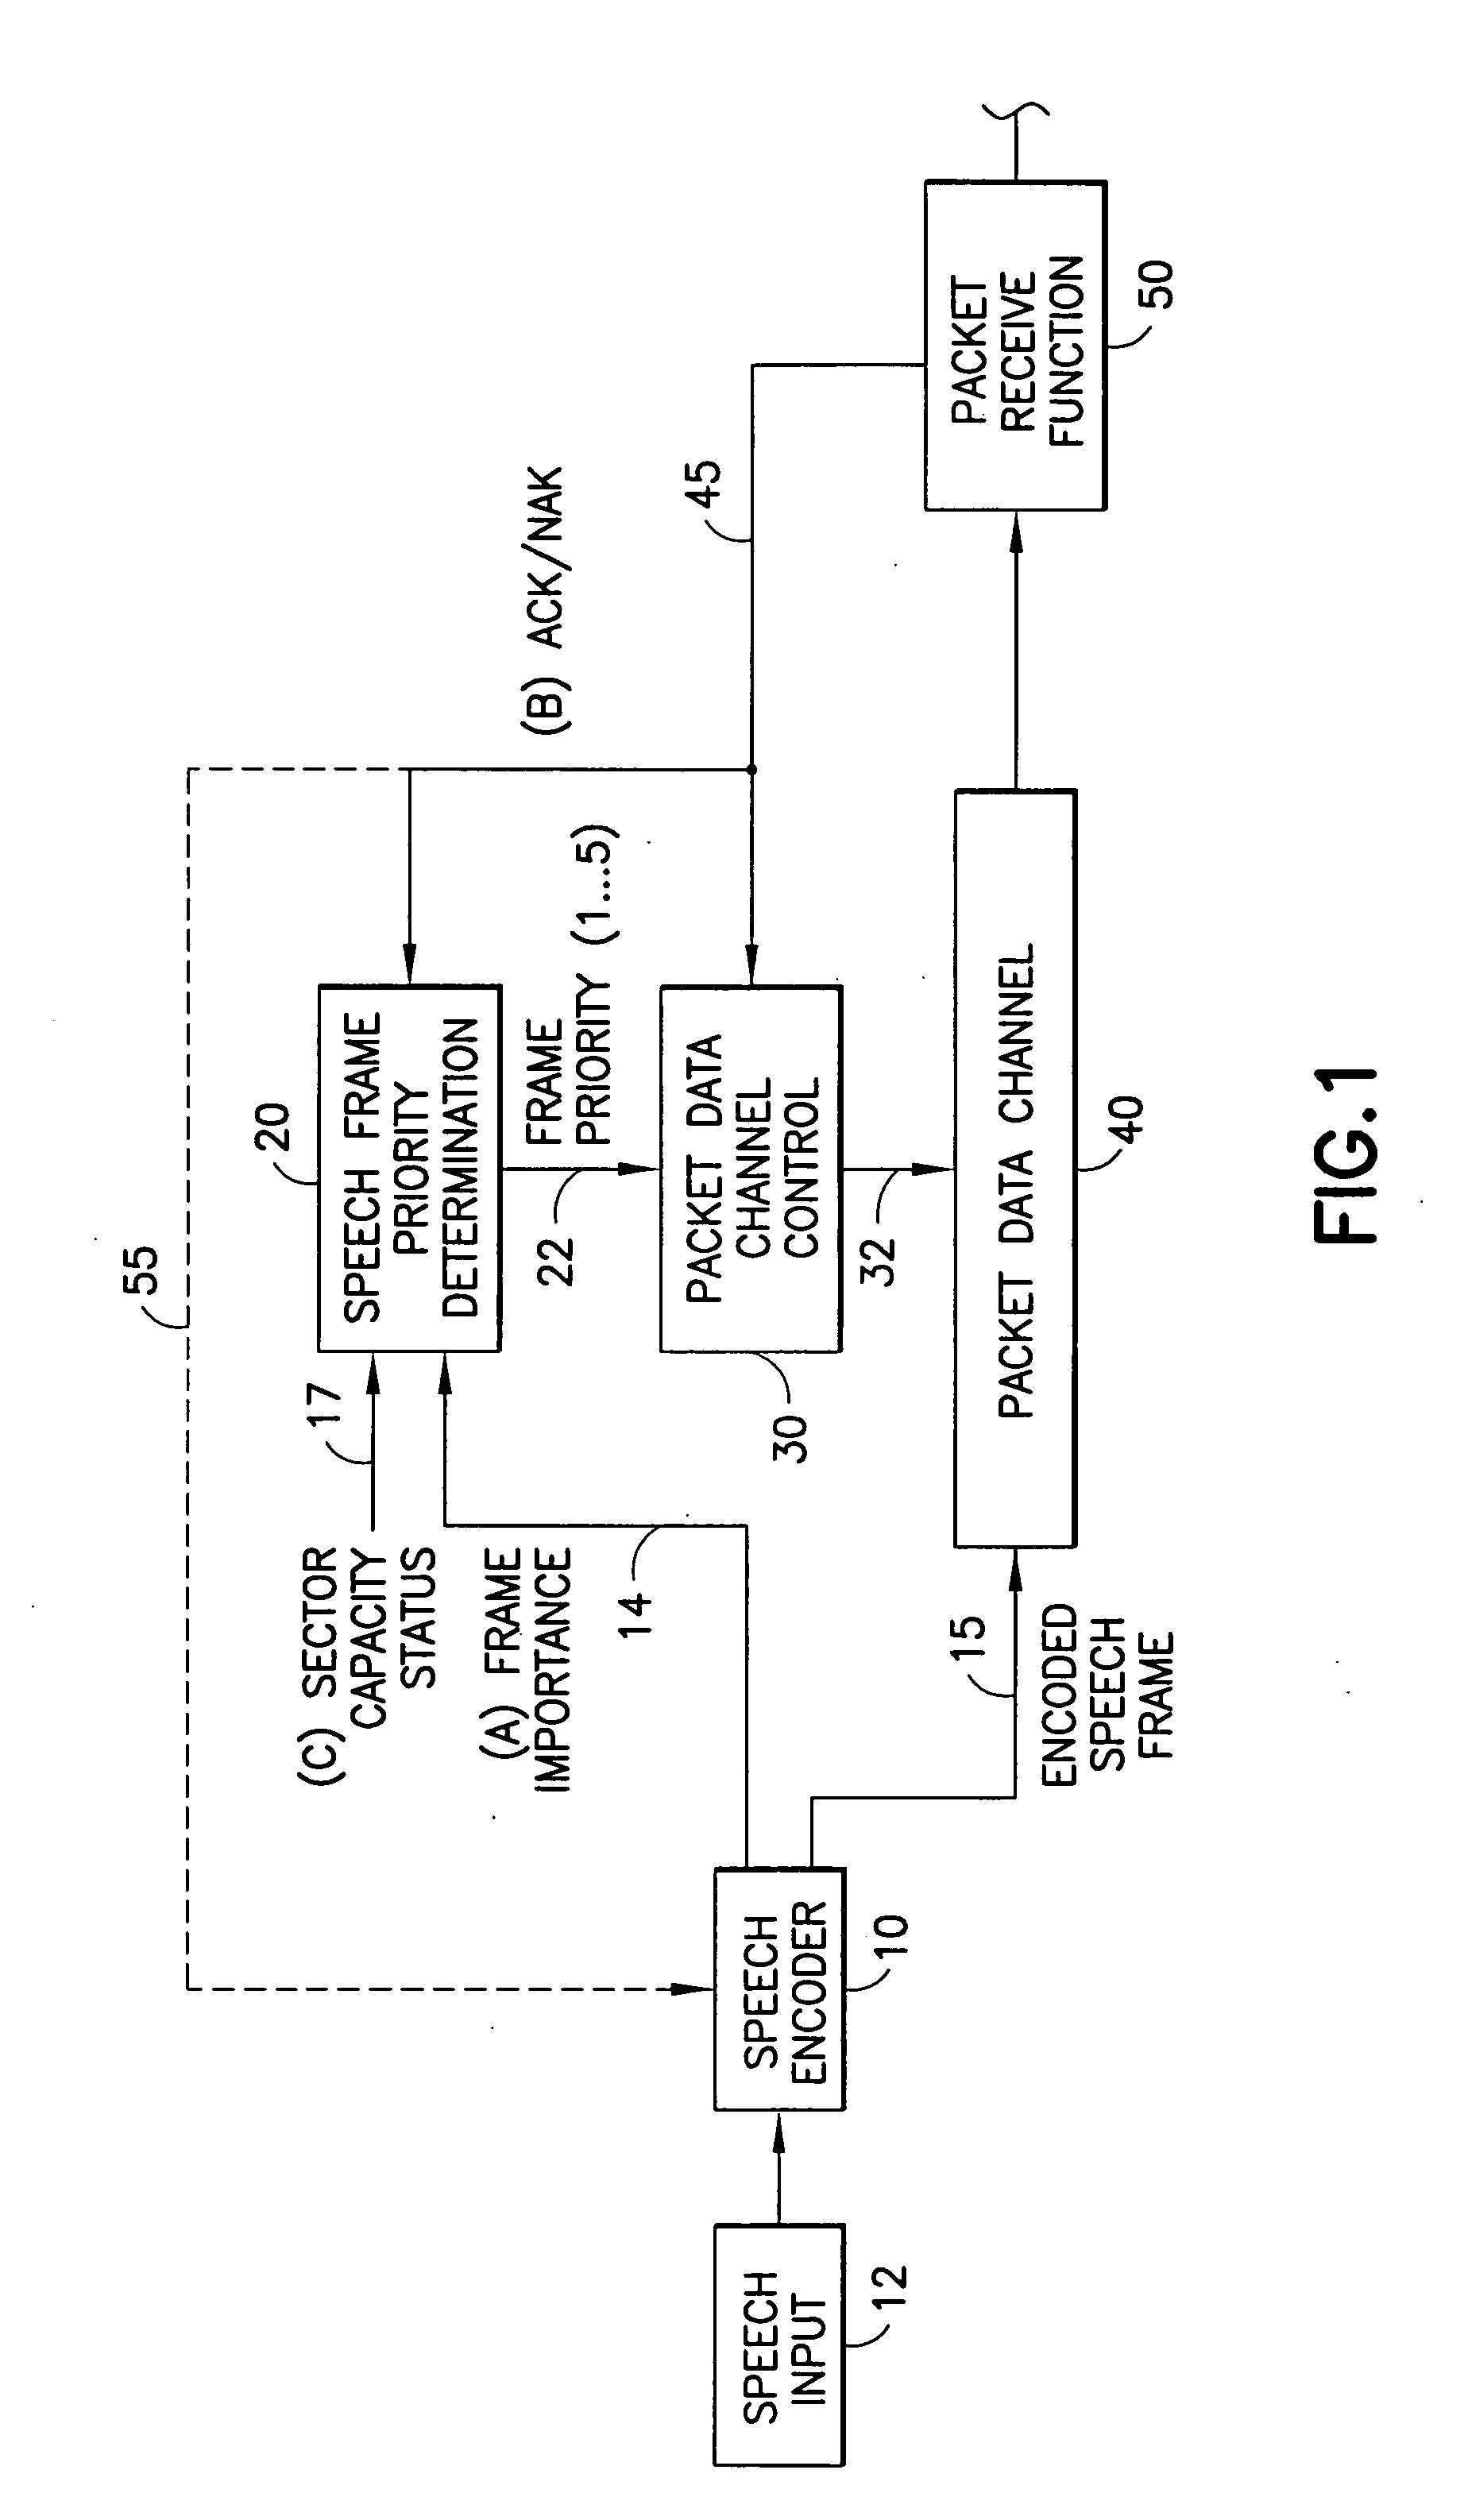 Codec-assisted capacity enhancement of wireless VoIP